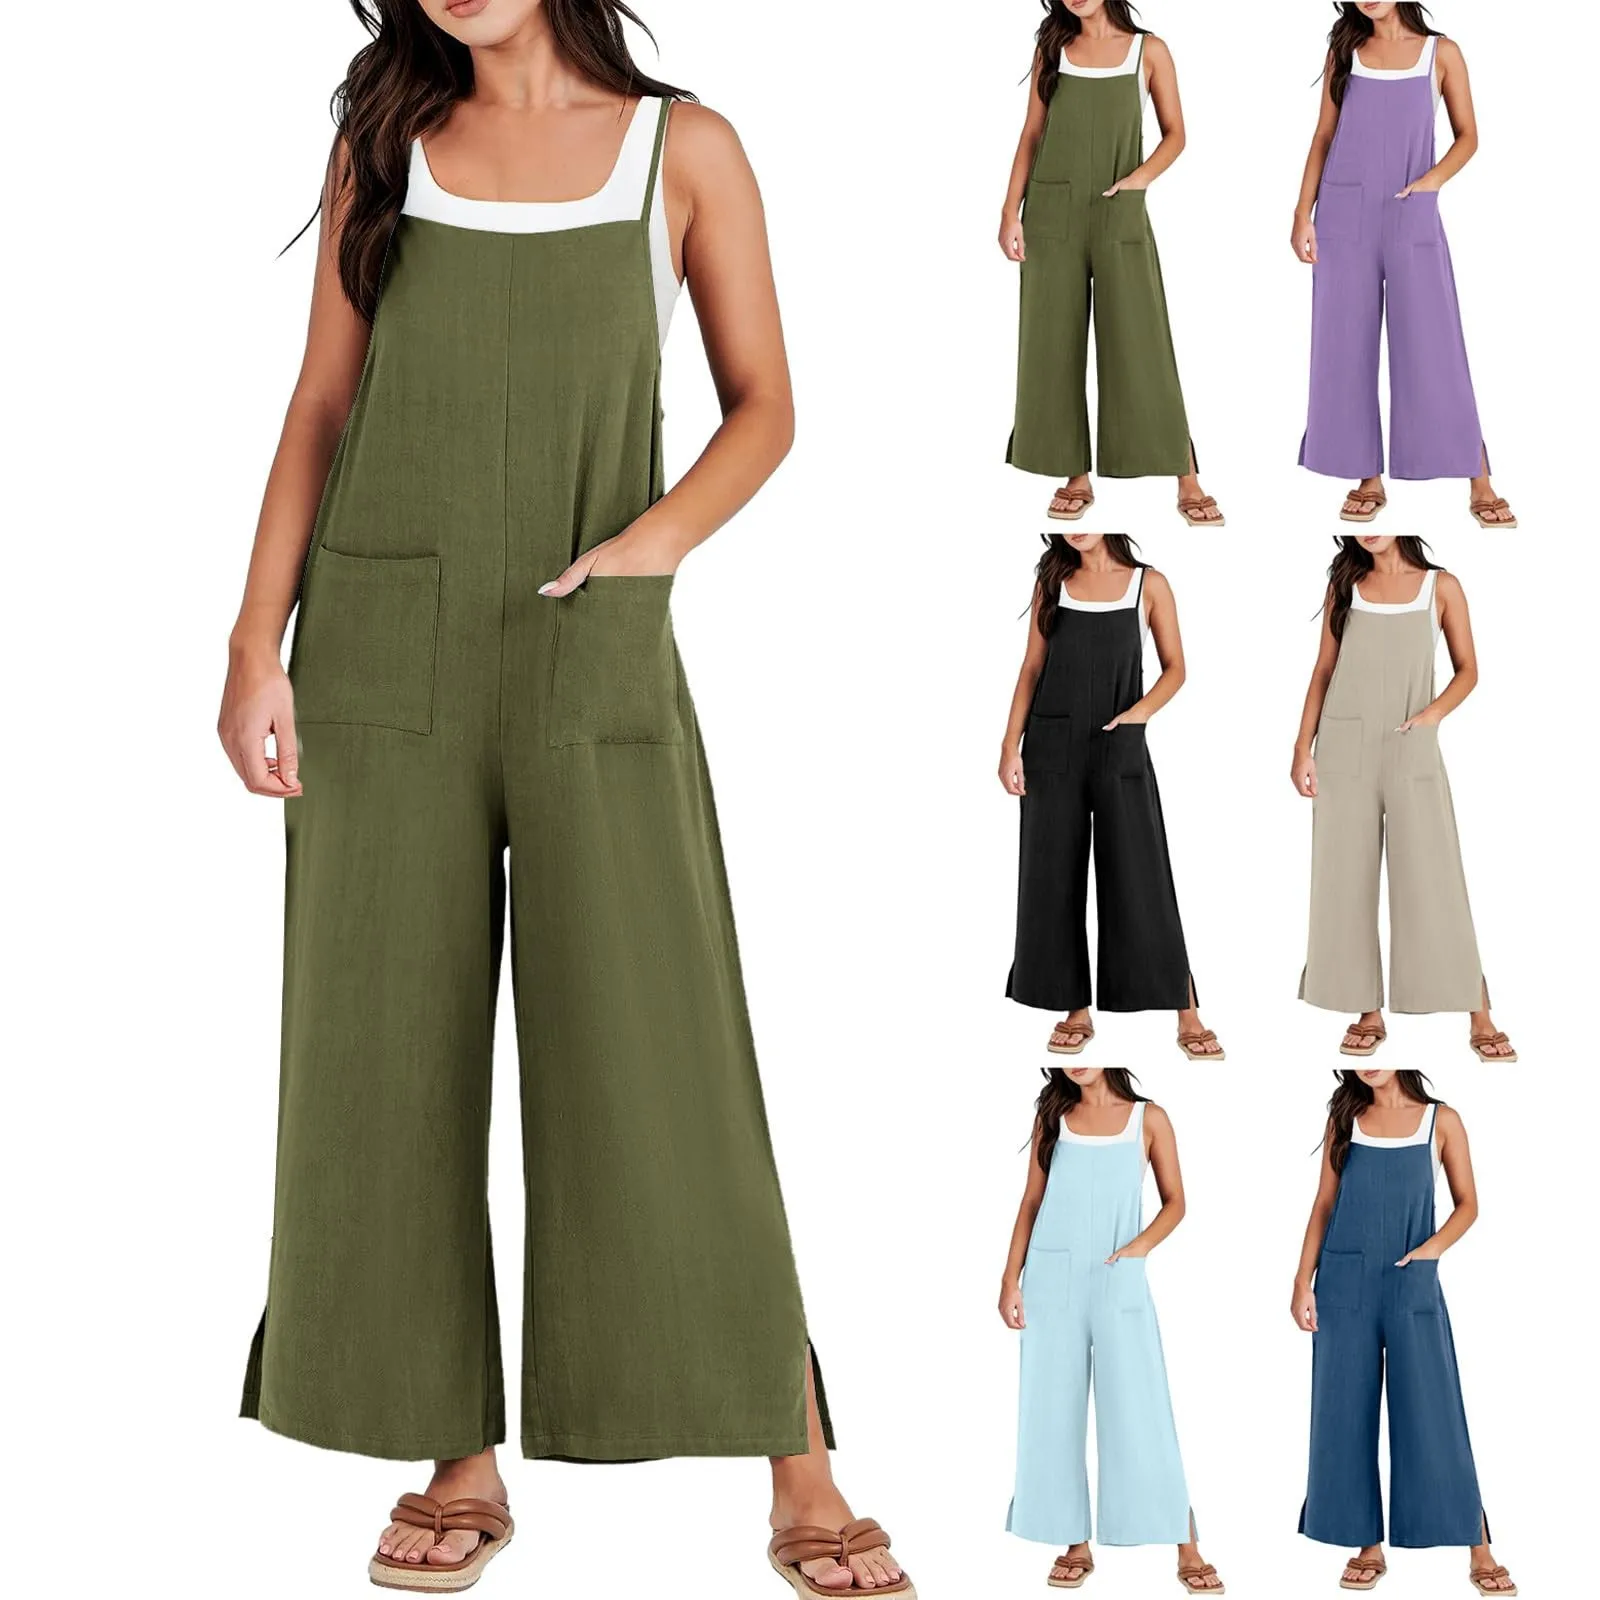 

Women Jumpsuit Casual Loose Linen Wide Leg Baggy Overalls Long Pants Beach Vacation Rompers With Pockets traf official store